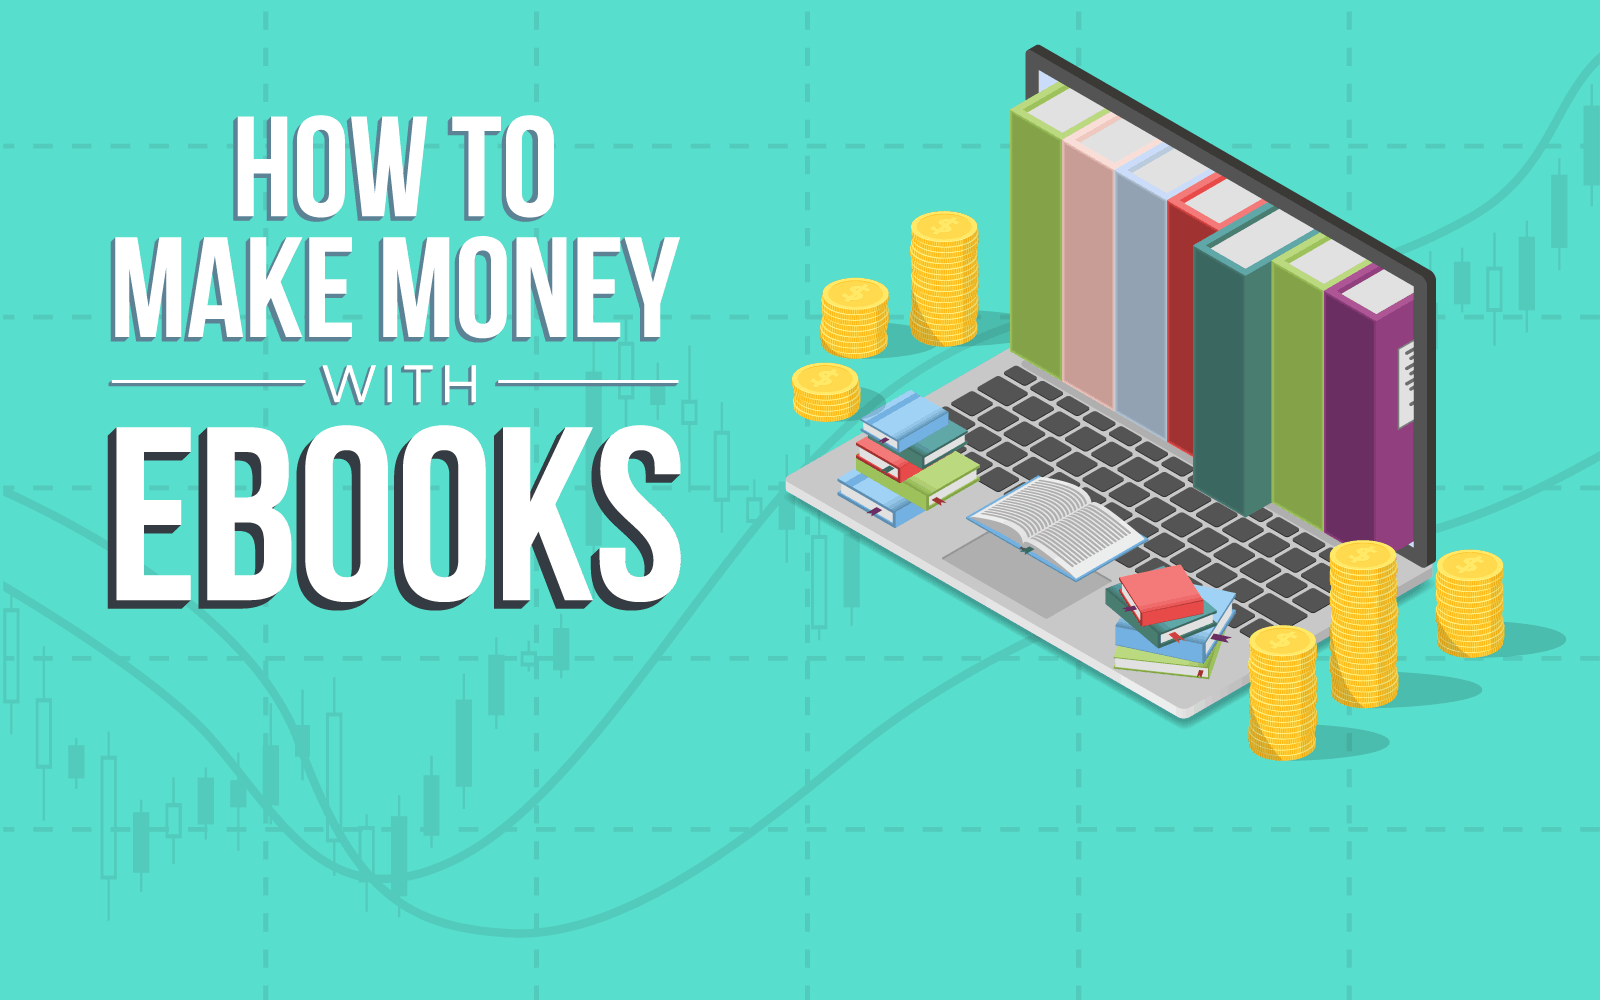 How to make a couple hundred dollars a month without spending a lot of time
